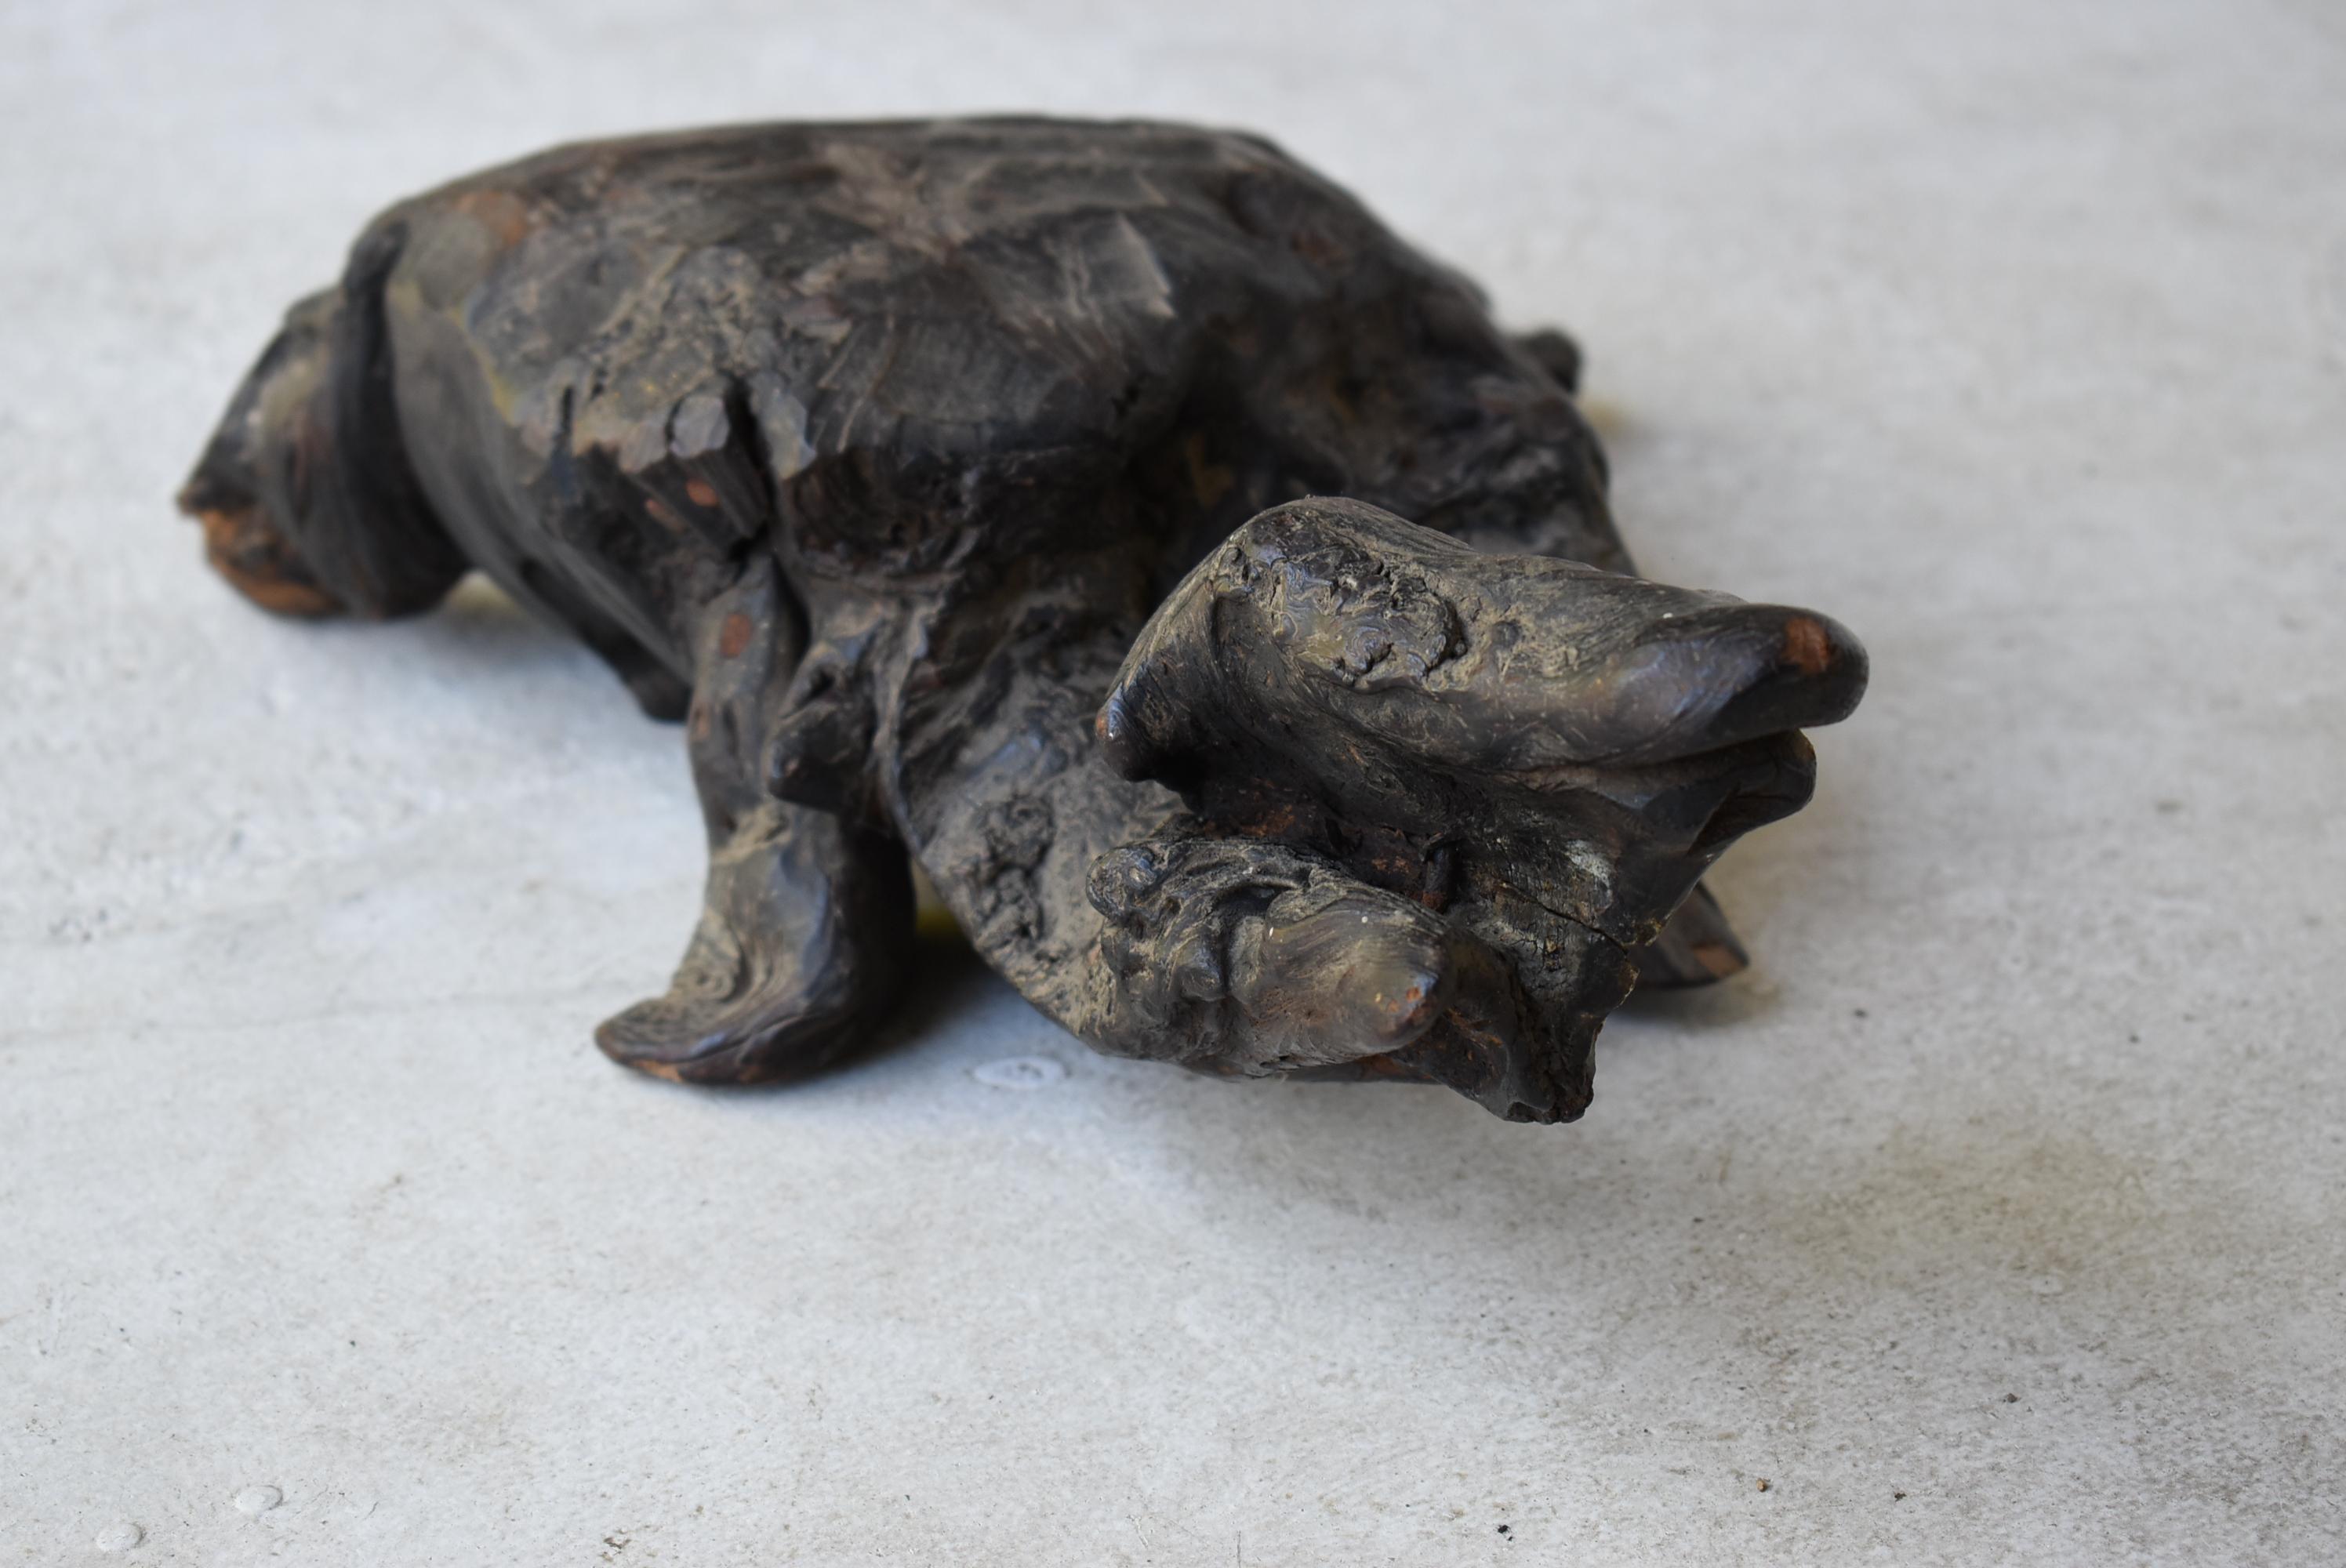 19th Century Japanese Old Wood Carving Turtle 1800s-1900s/Antique Art Wabisabi